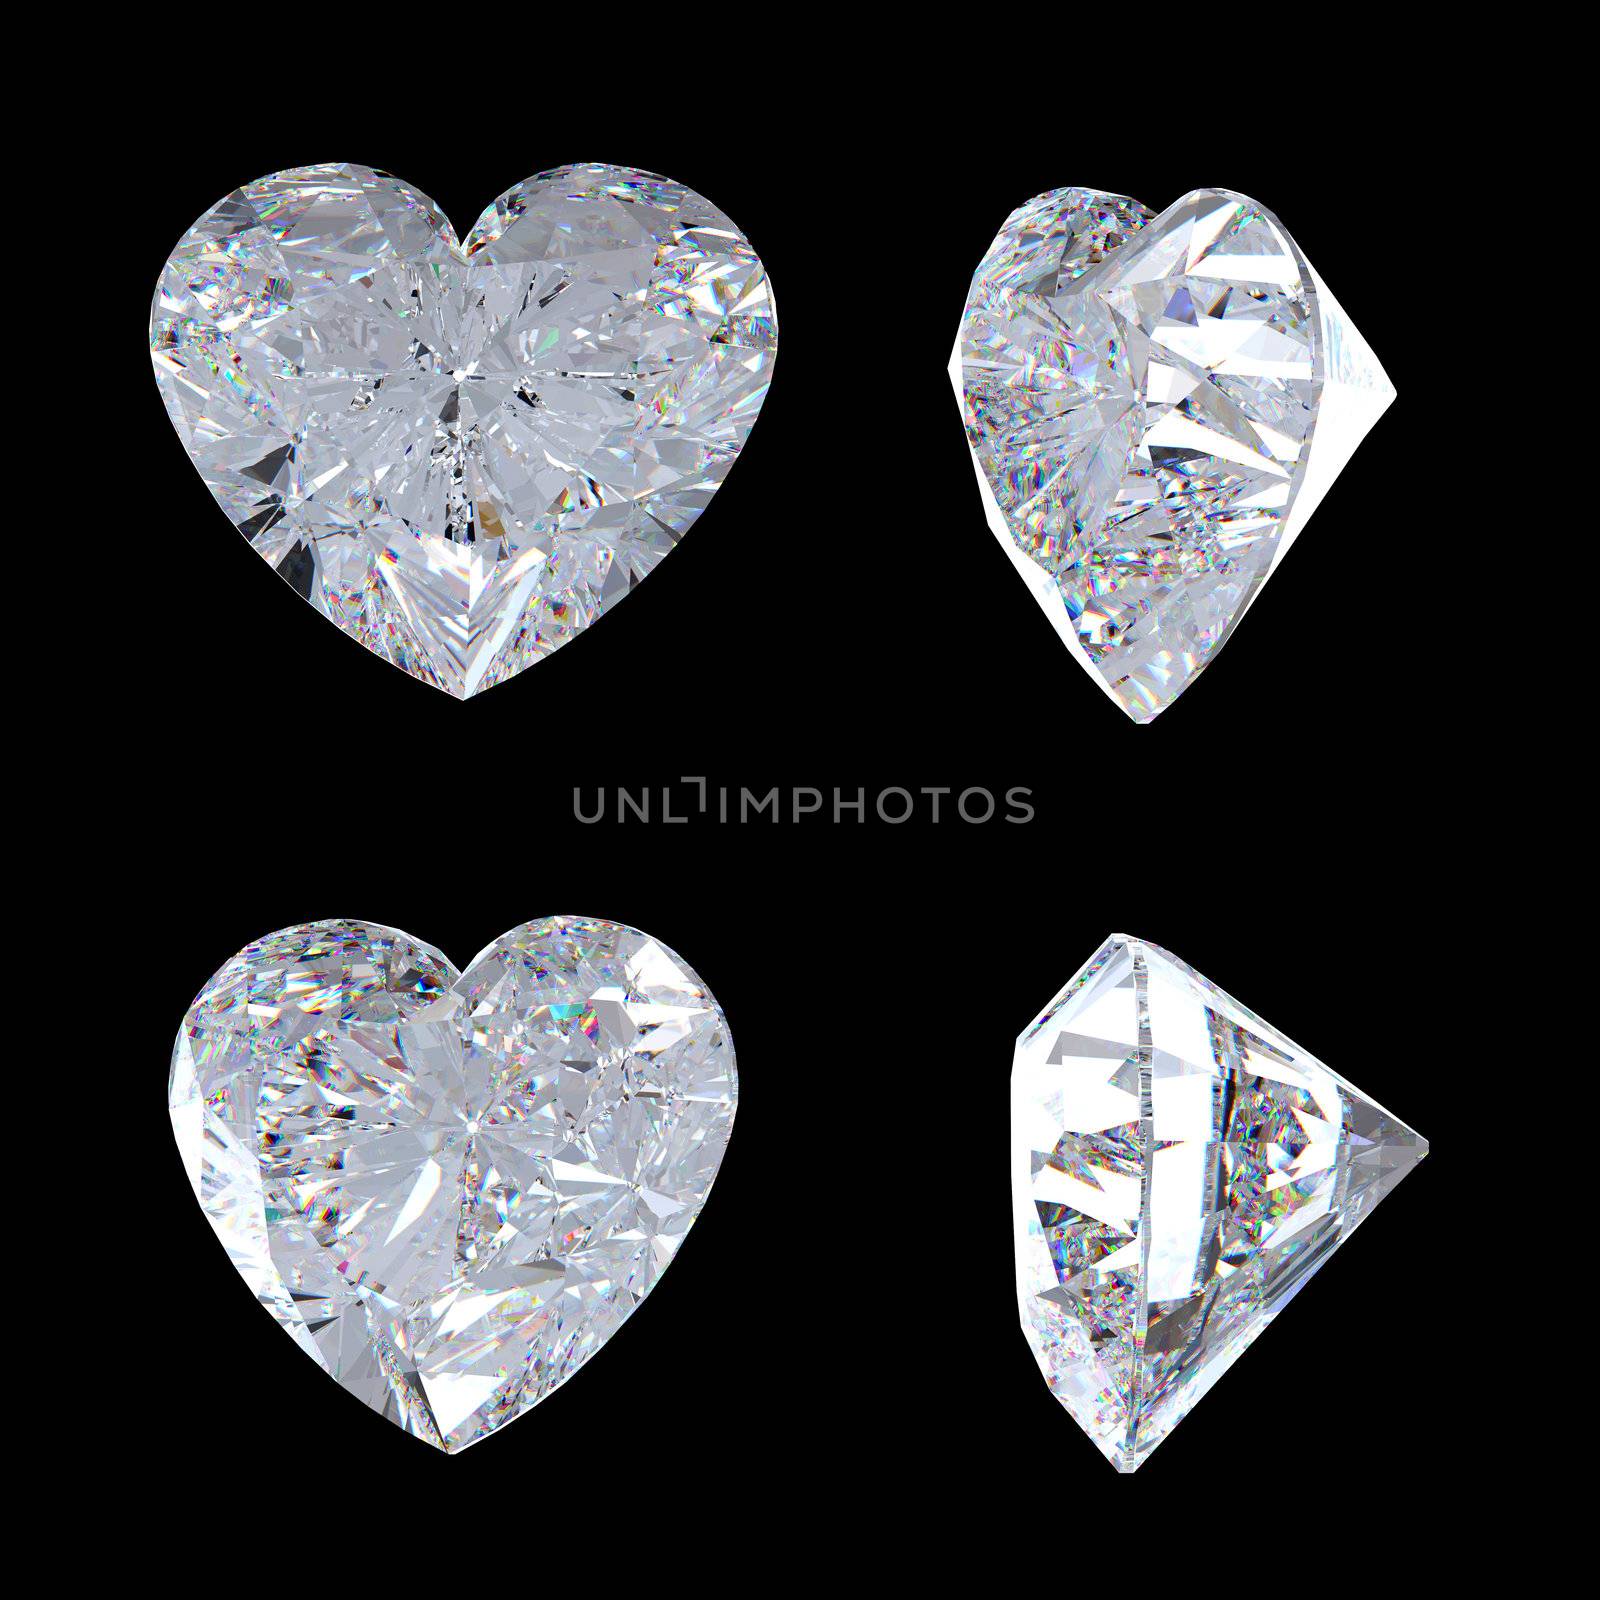 Top and side views of heart shaped diamond. Over black, Extralarge resolution. Other gems are in my portfolio.